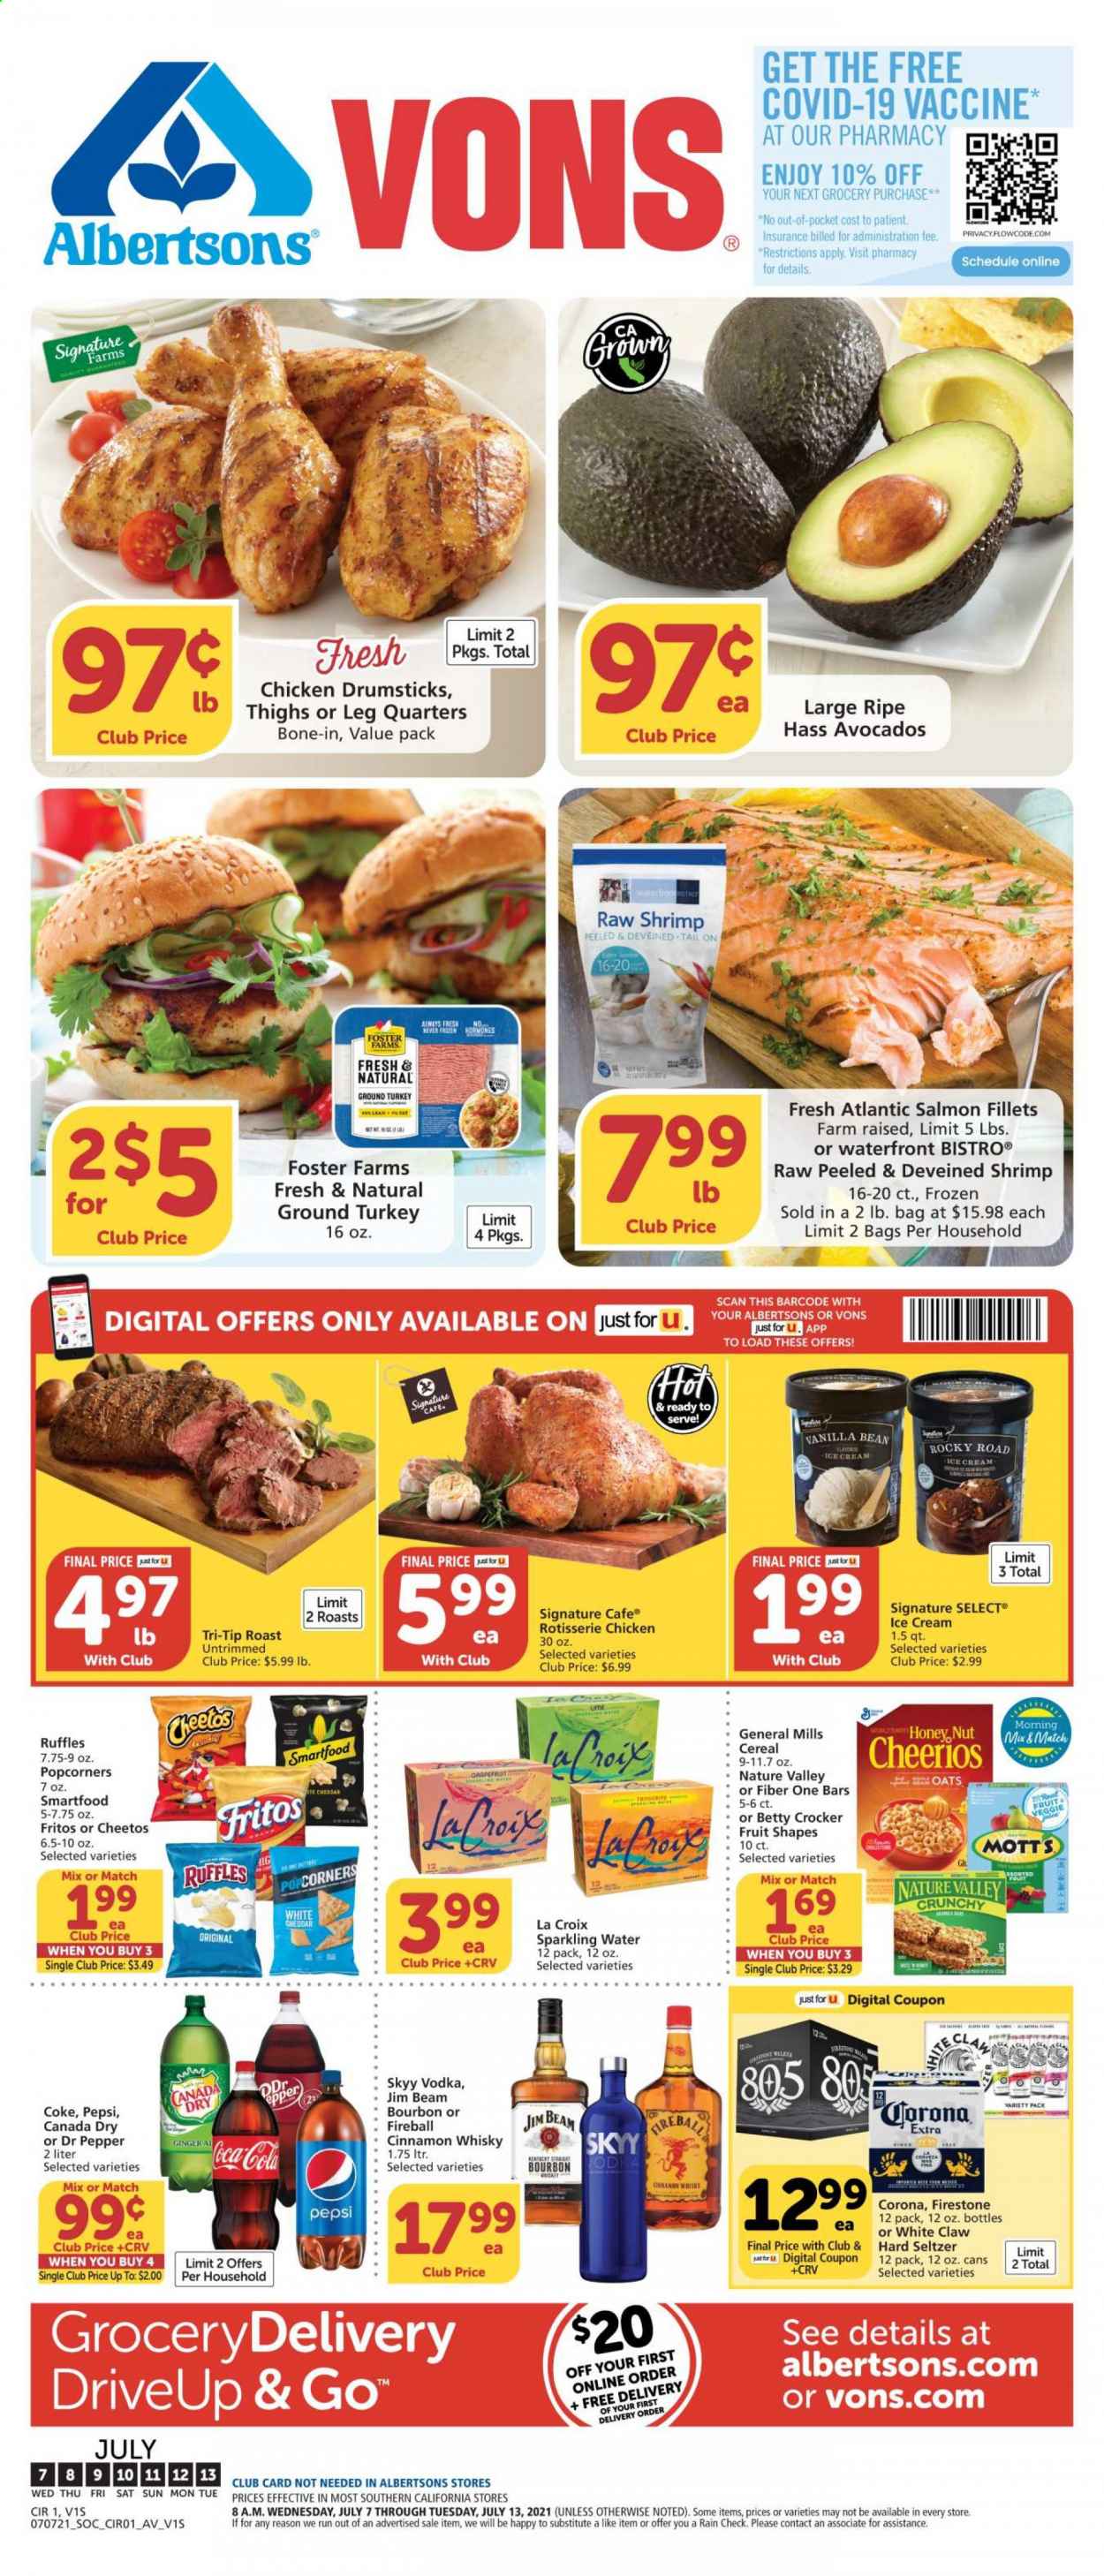 thumbnail - Albertsons Flyer - 07/07/2021 - 07/13/2021 - Sales products - ginger, avocado, Mott's, salmon, salmon fillet, shrimps, chicken roast, ice cream, Fritos, Cheetos, Smartfood, popcorn, Ruffles, oats, cereals, Cheerios, Nature Valley, Fiber One, Canada Dry, Coca-Cola, Pepsi, Dr. Pepper, sparkling water, vodka, SKYY, Jim Beam, White Claw, Hard Seltzer, cinnamon whisky, whisky, beer, Corona Extra, ground turkey, chicken drumsticks. Page 1.